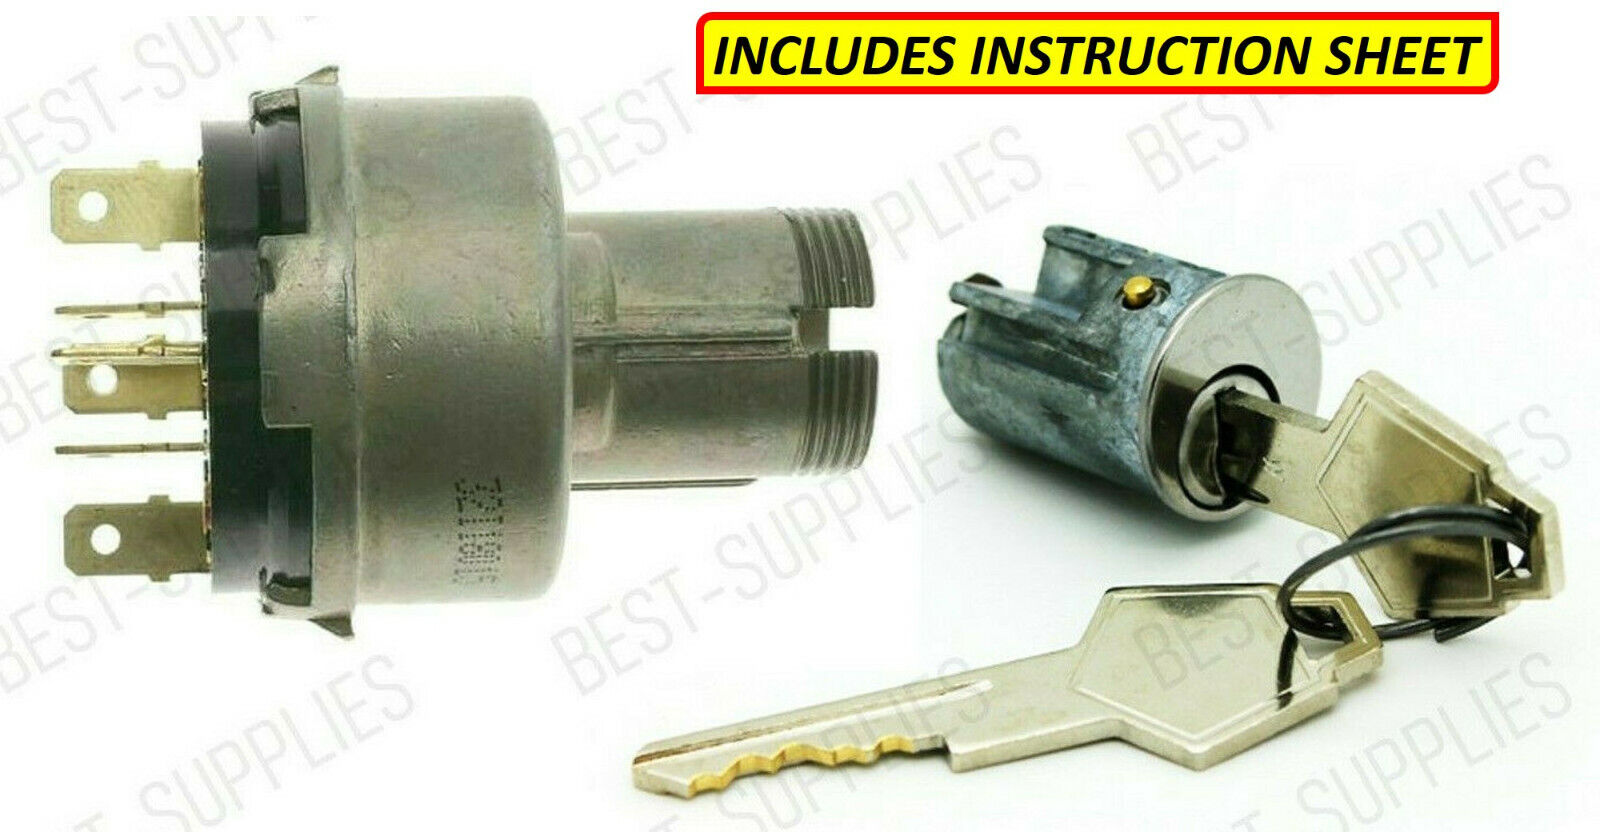 Ignition Switch Ignition Lock Cylinder combo for many Chrysler Dodge Plymouth